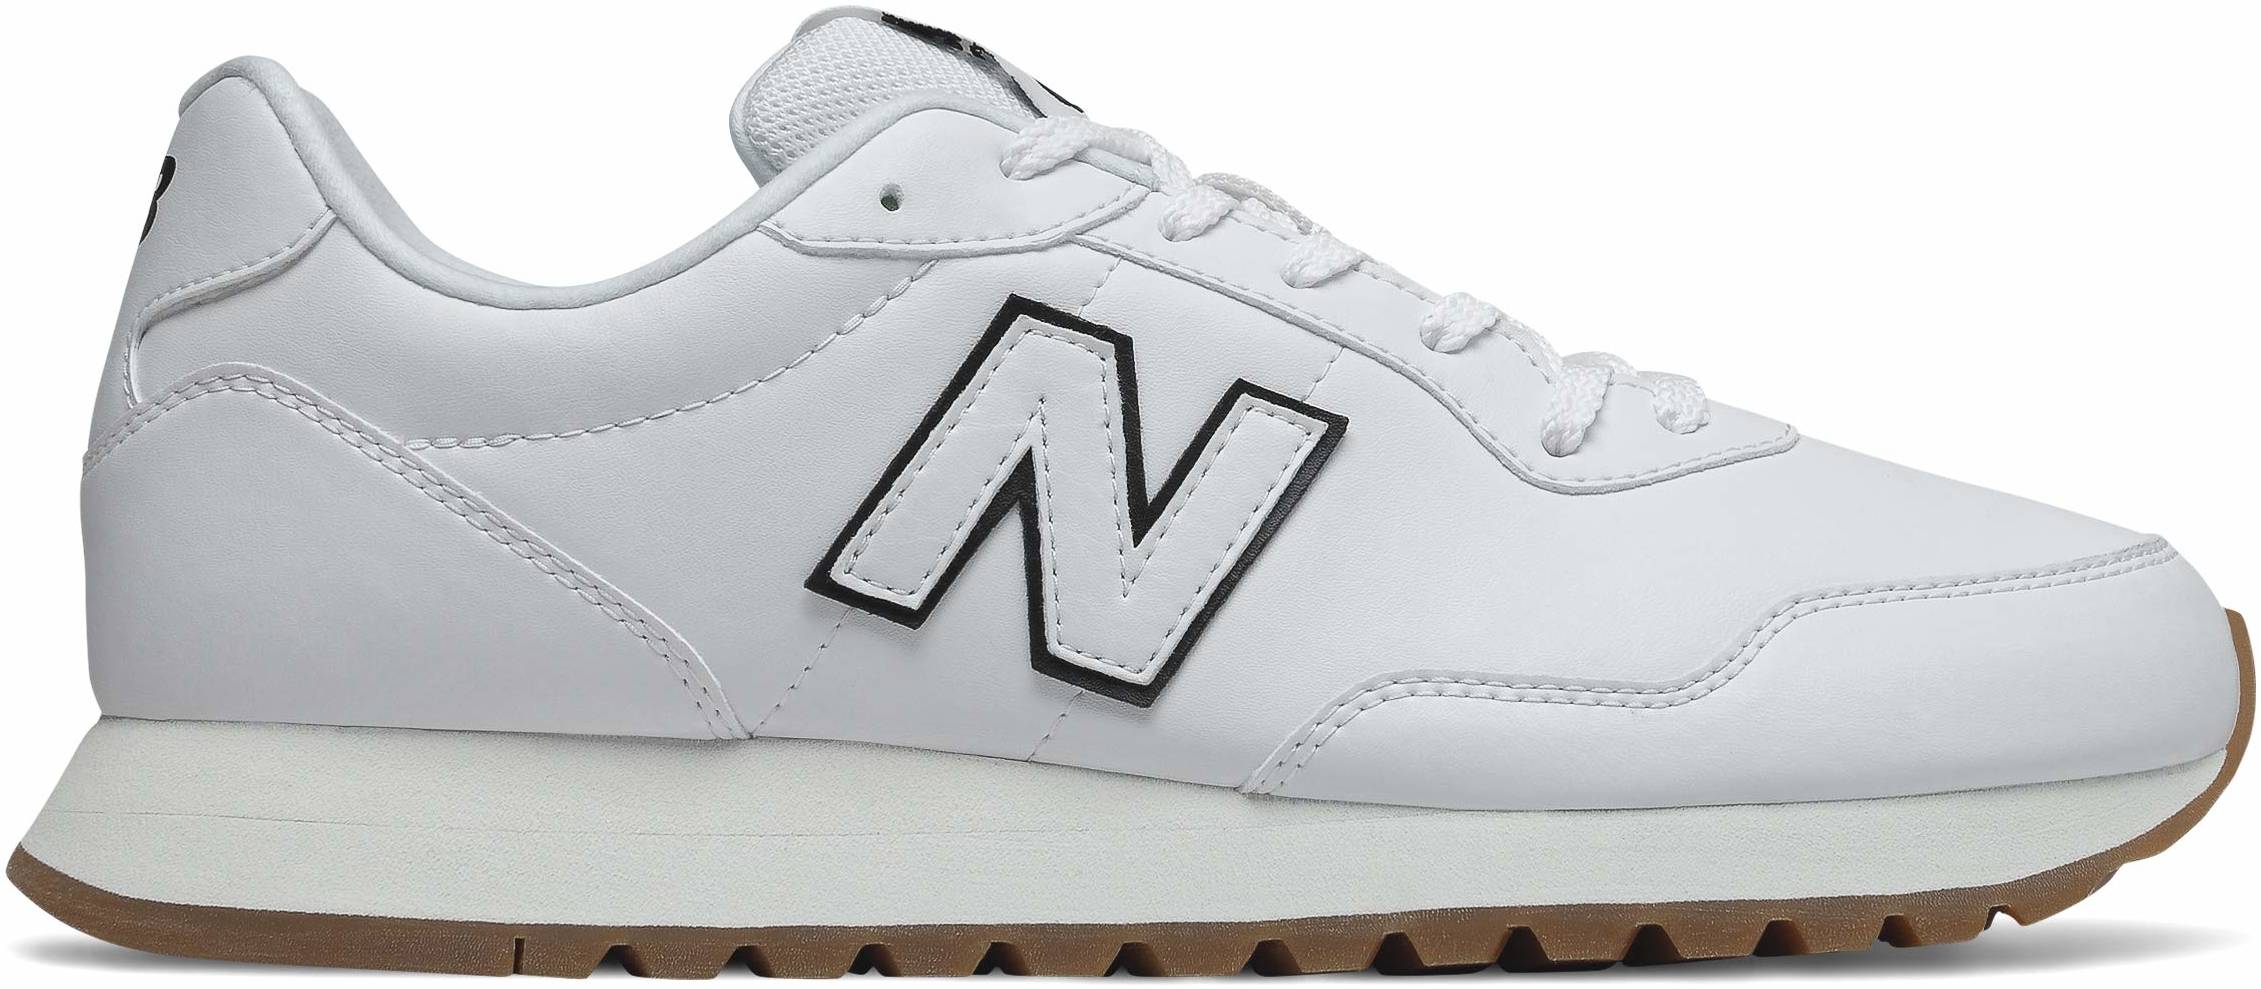 20+ White New Balance sneakers: Save up to 42% | RunRepeat